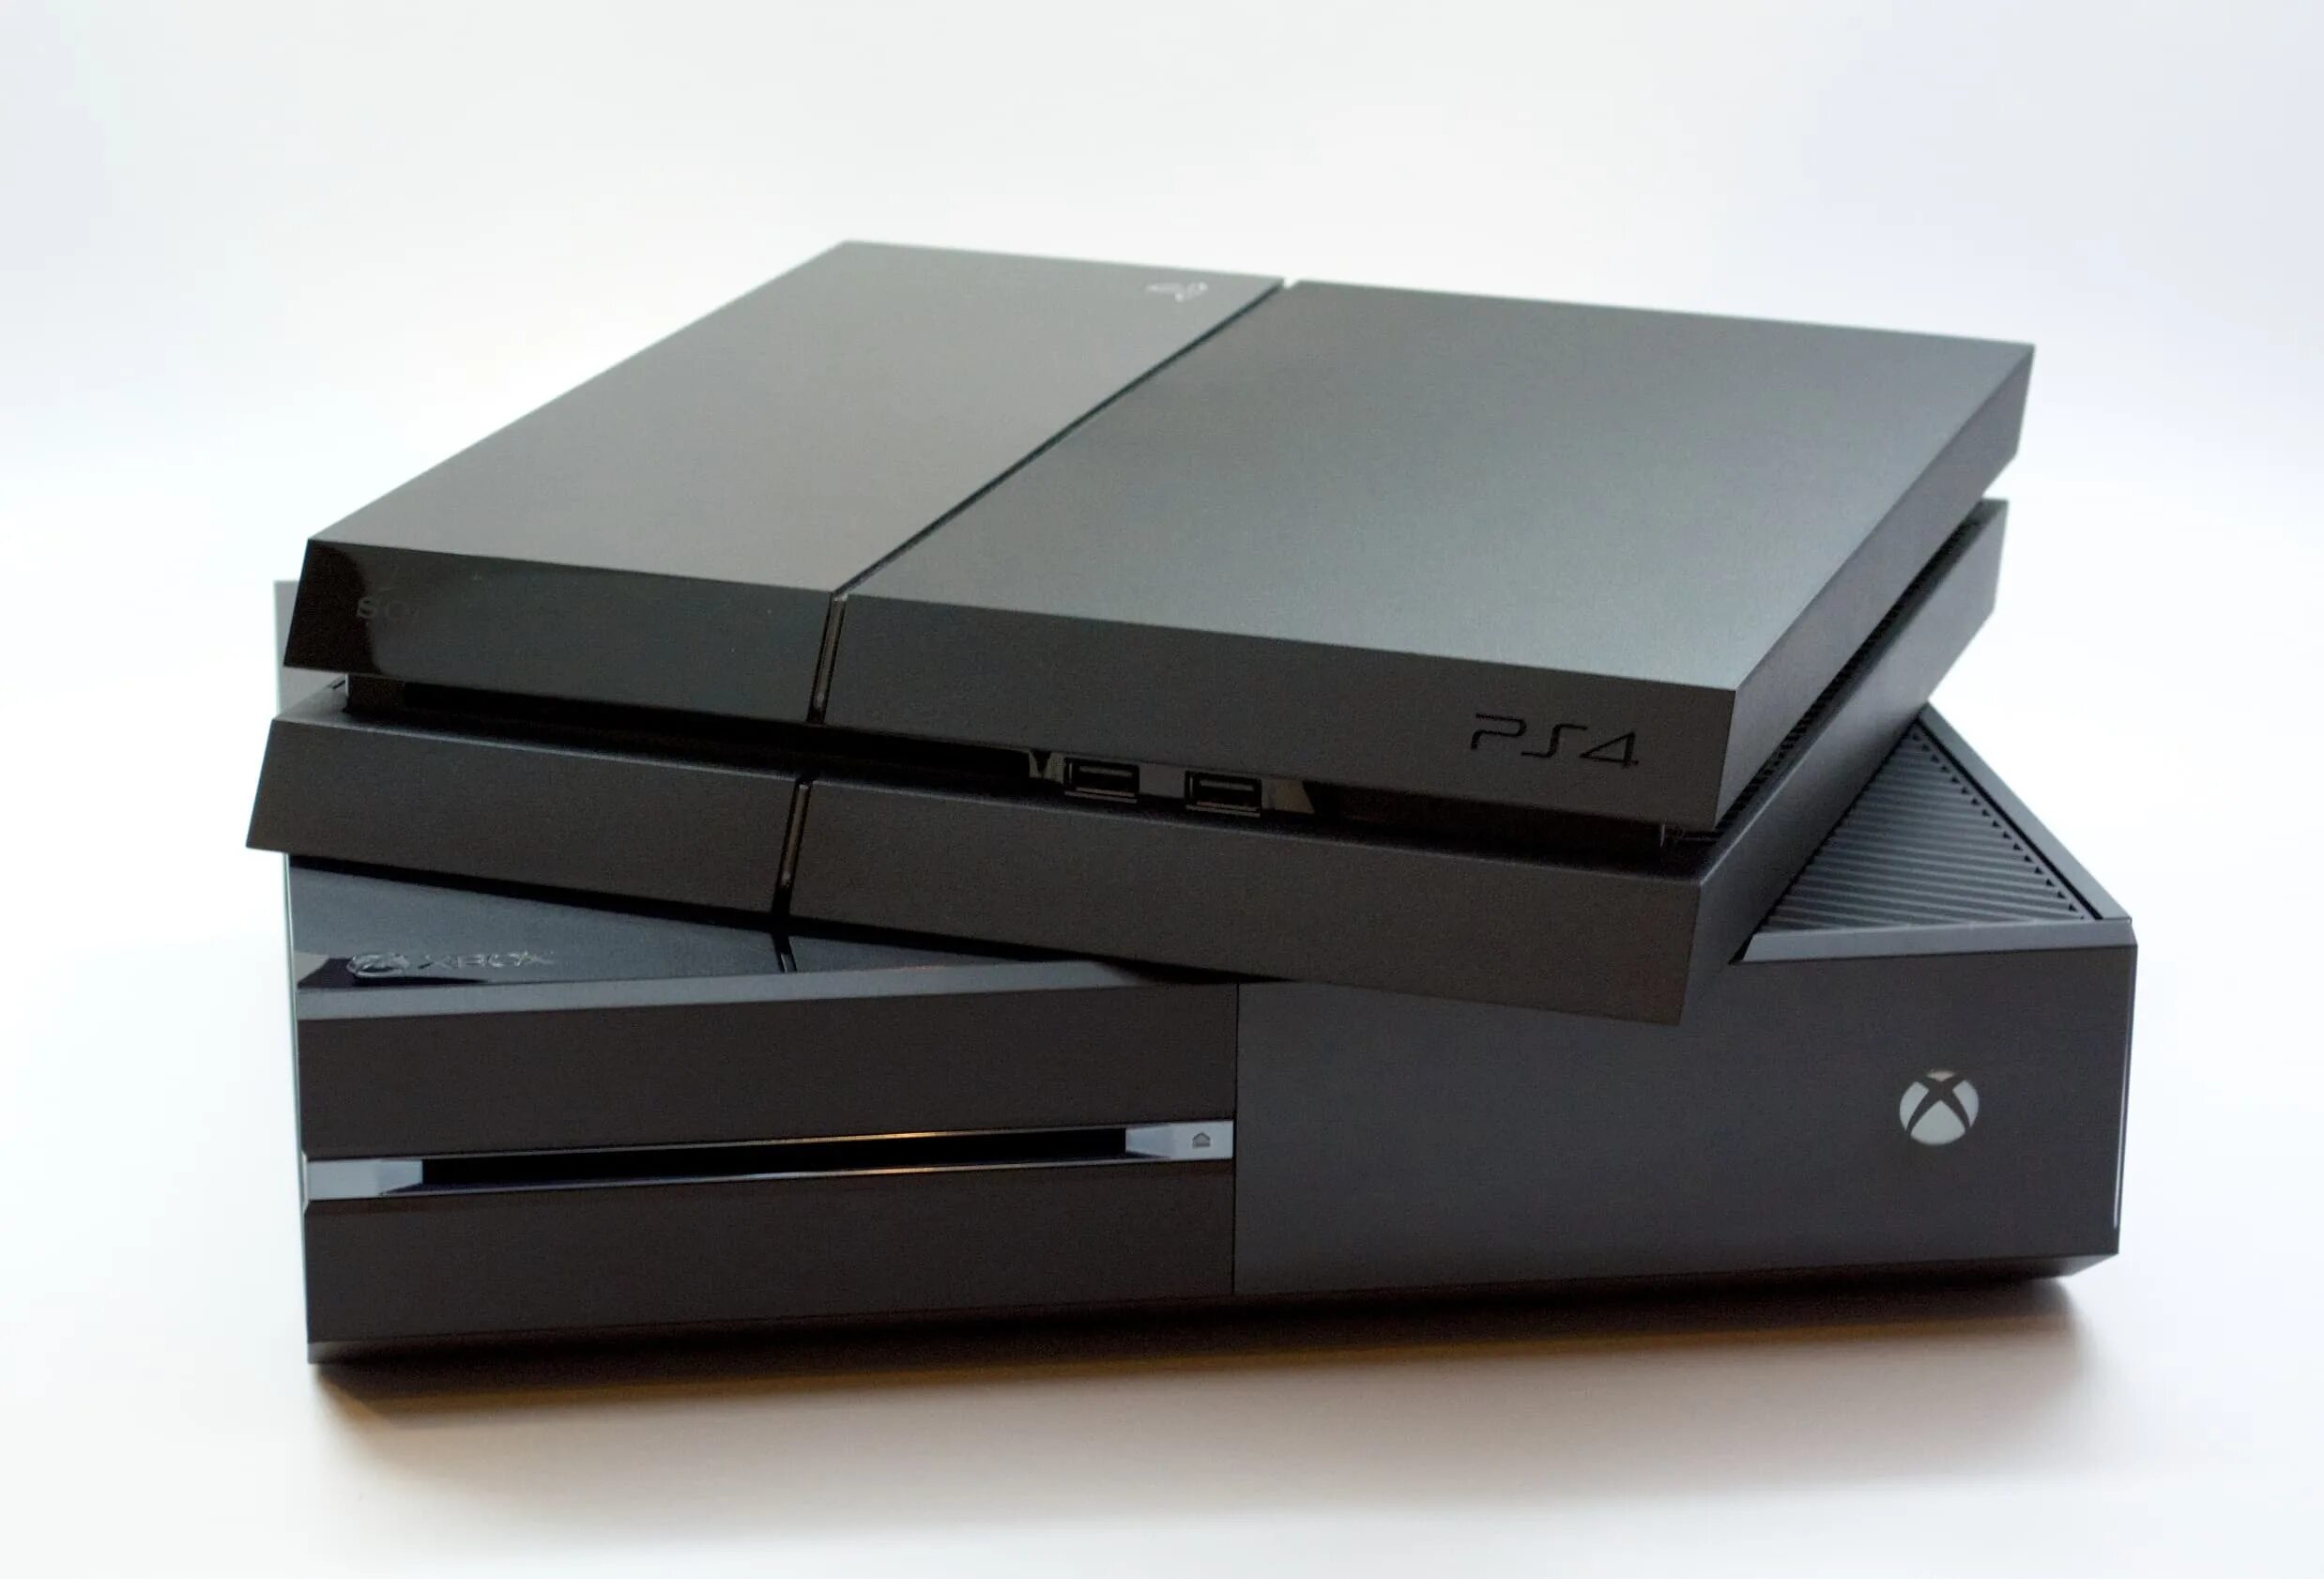 Playstation 4 pc. Ps4 Xbox one. PLAYSTATION ps4. Пс4 Xbox one s.. Хбокс оне и плейстейшен 4.